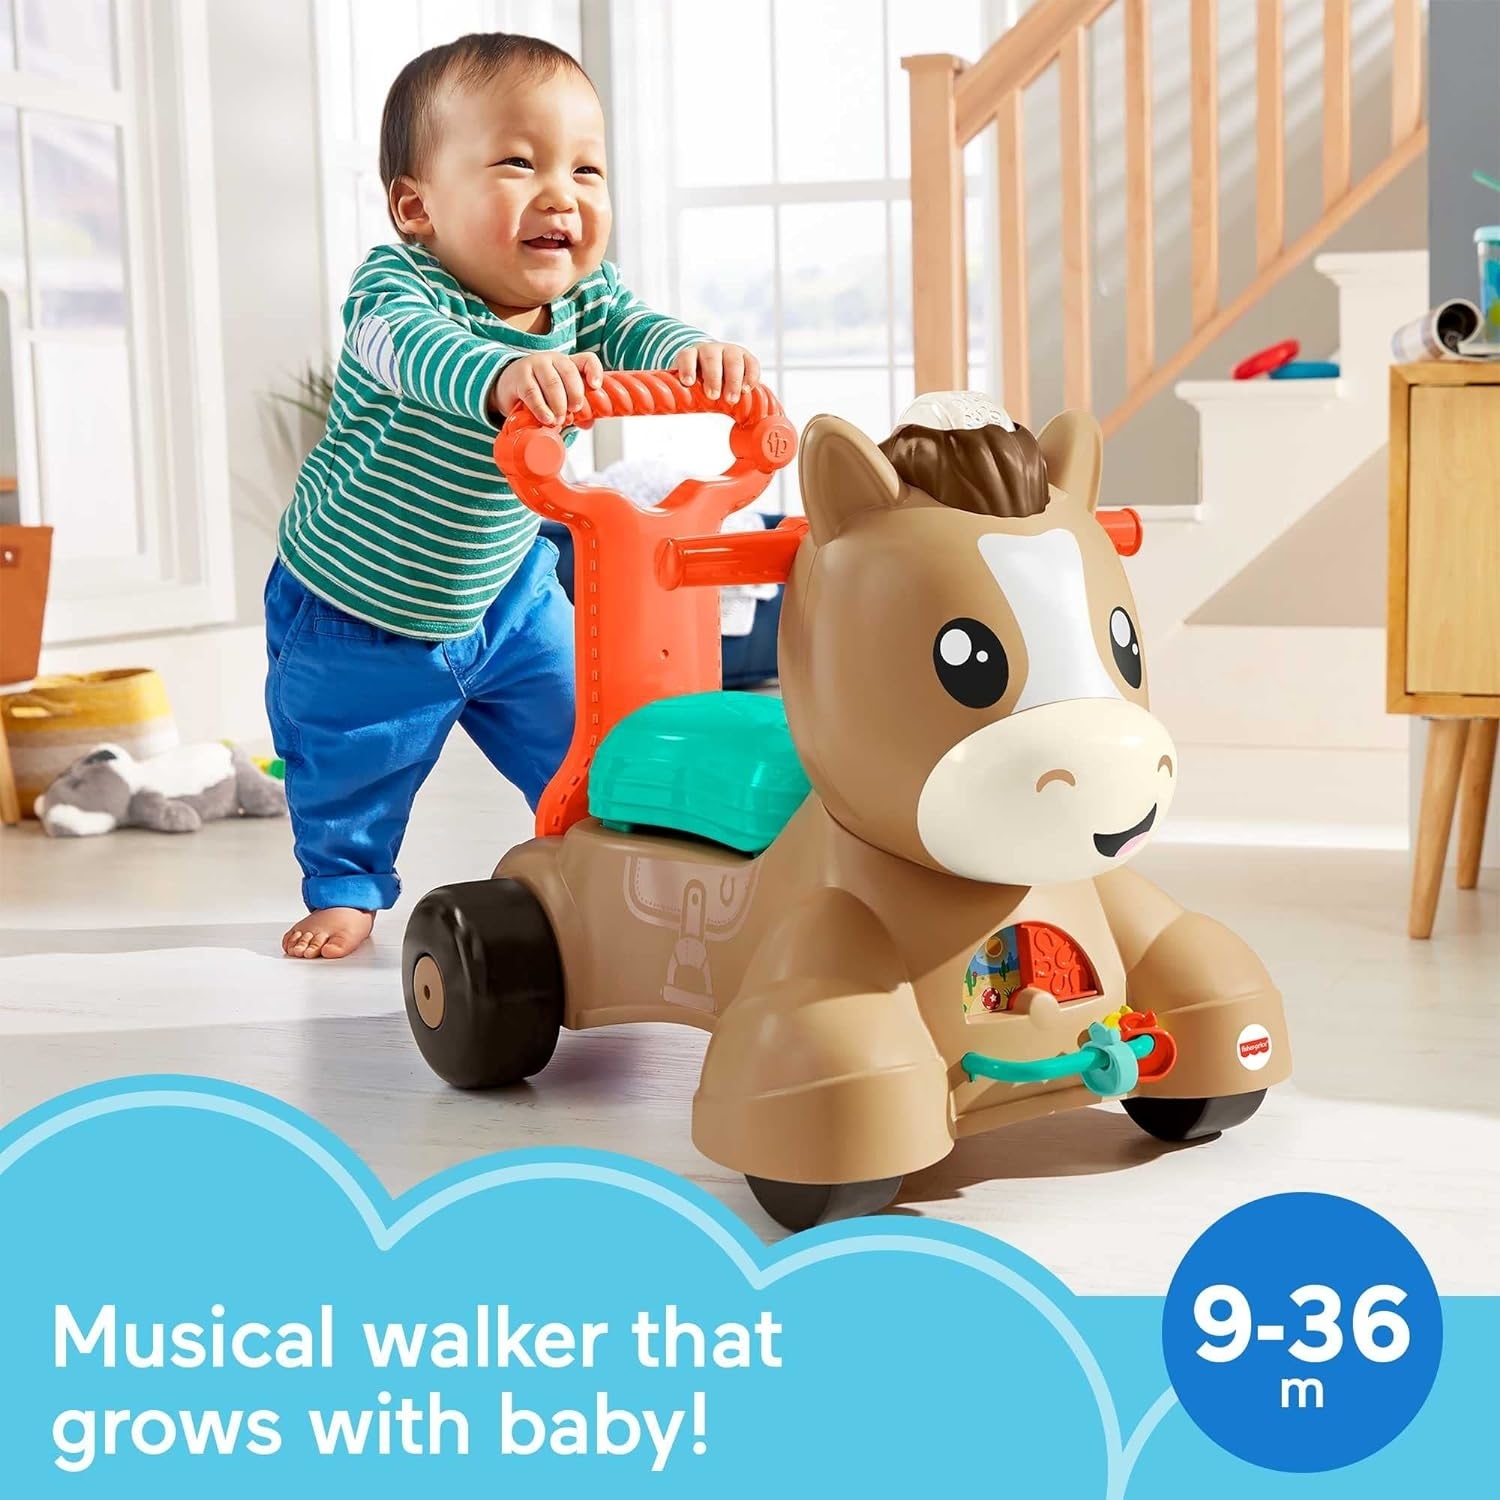 The musical walker shaped like a pony for 9-36 months